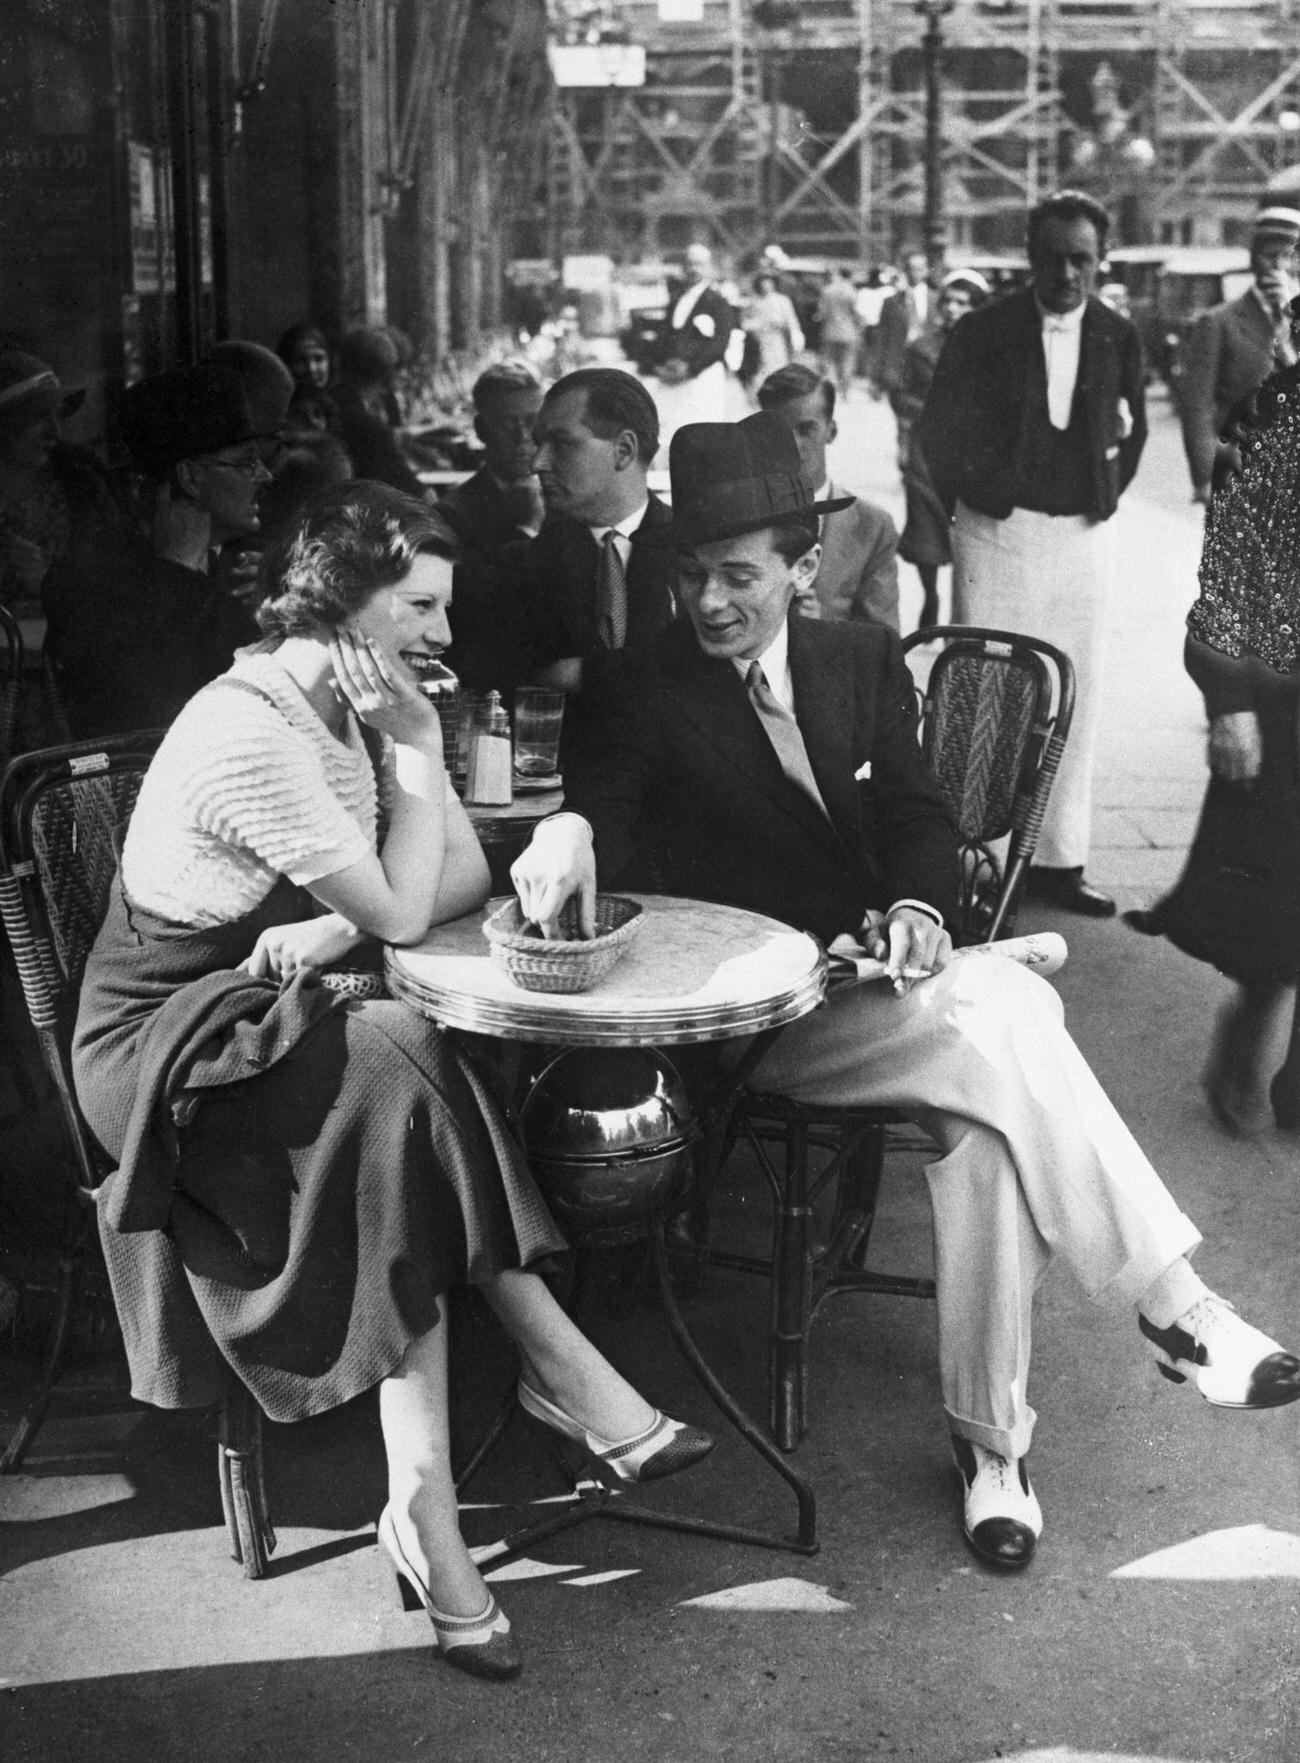 British Fascist John Amery with Fiancée Una Wing at a Paris Cafe, 24 August 1932